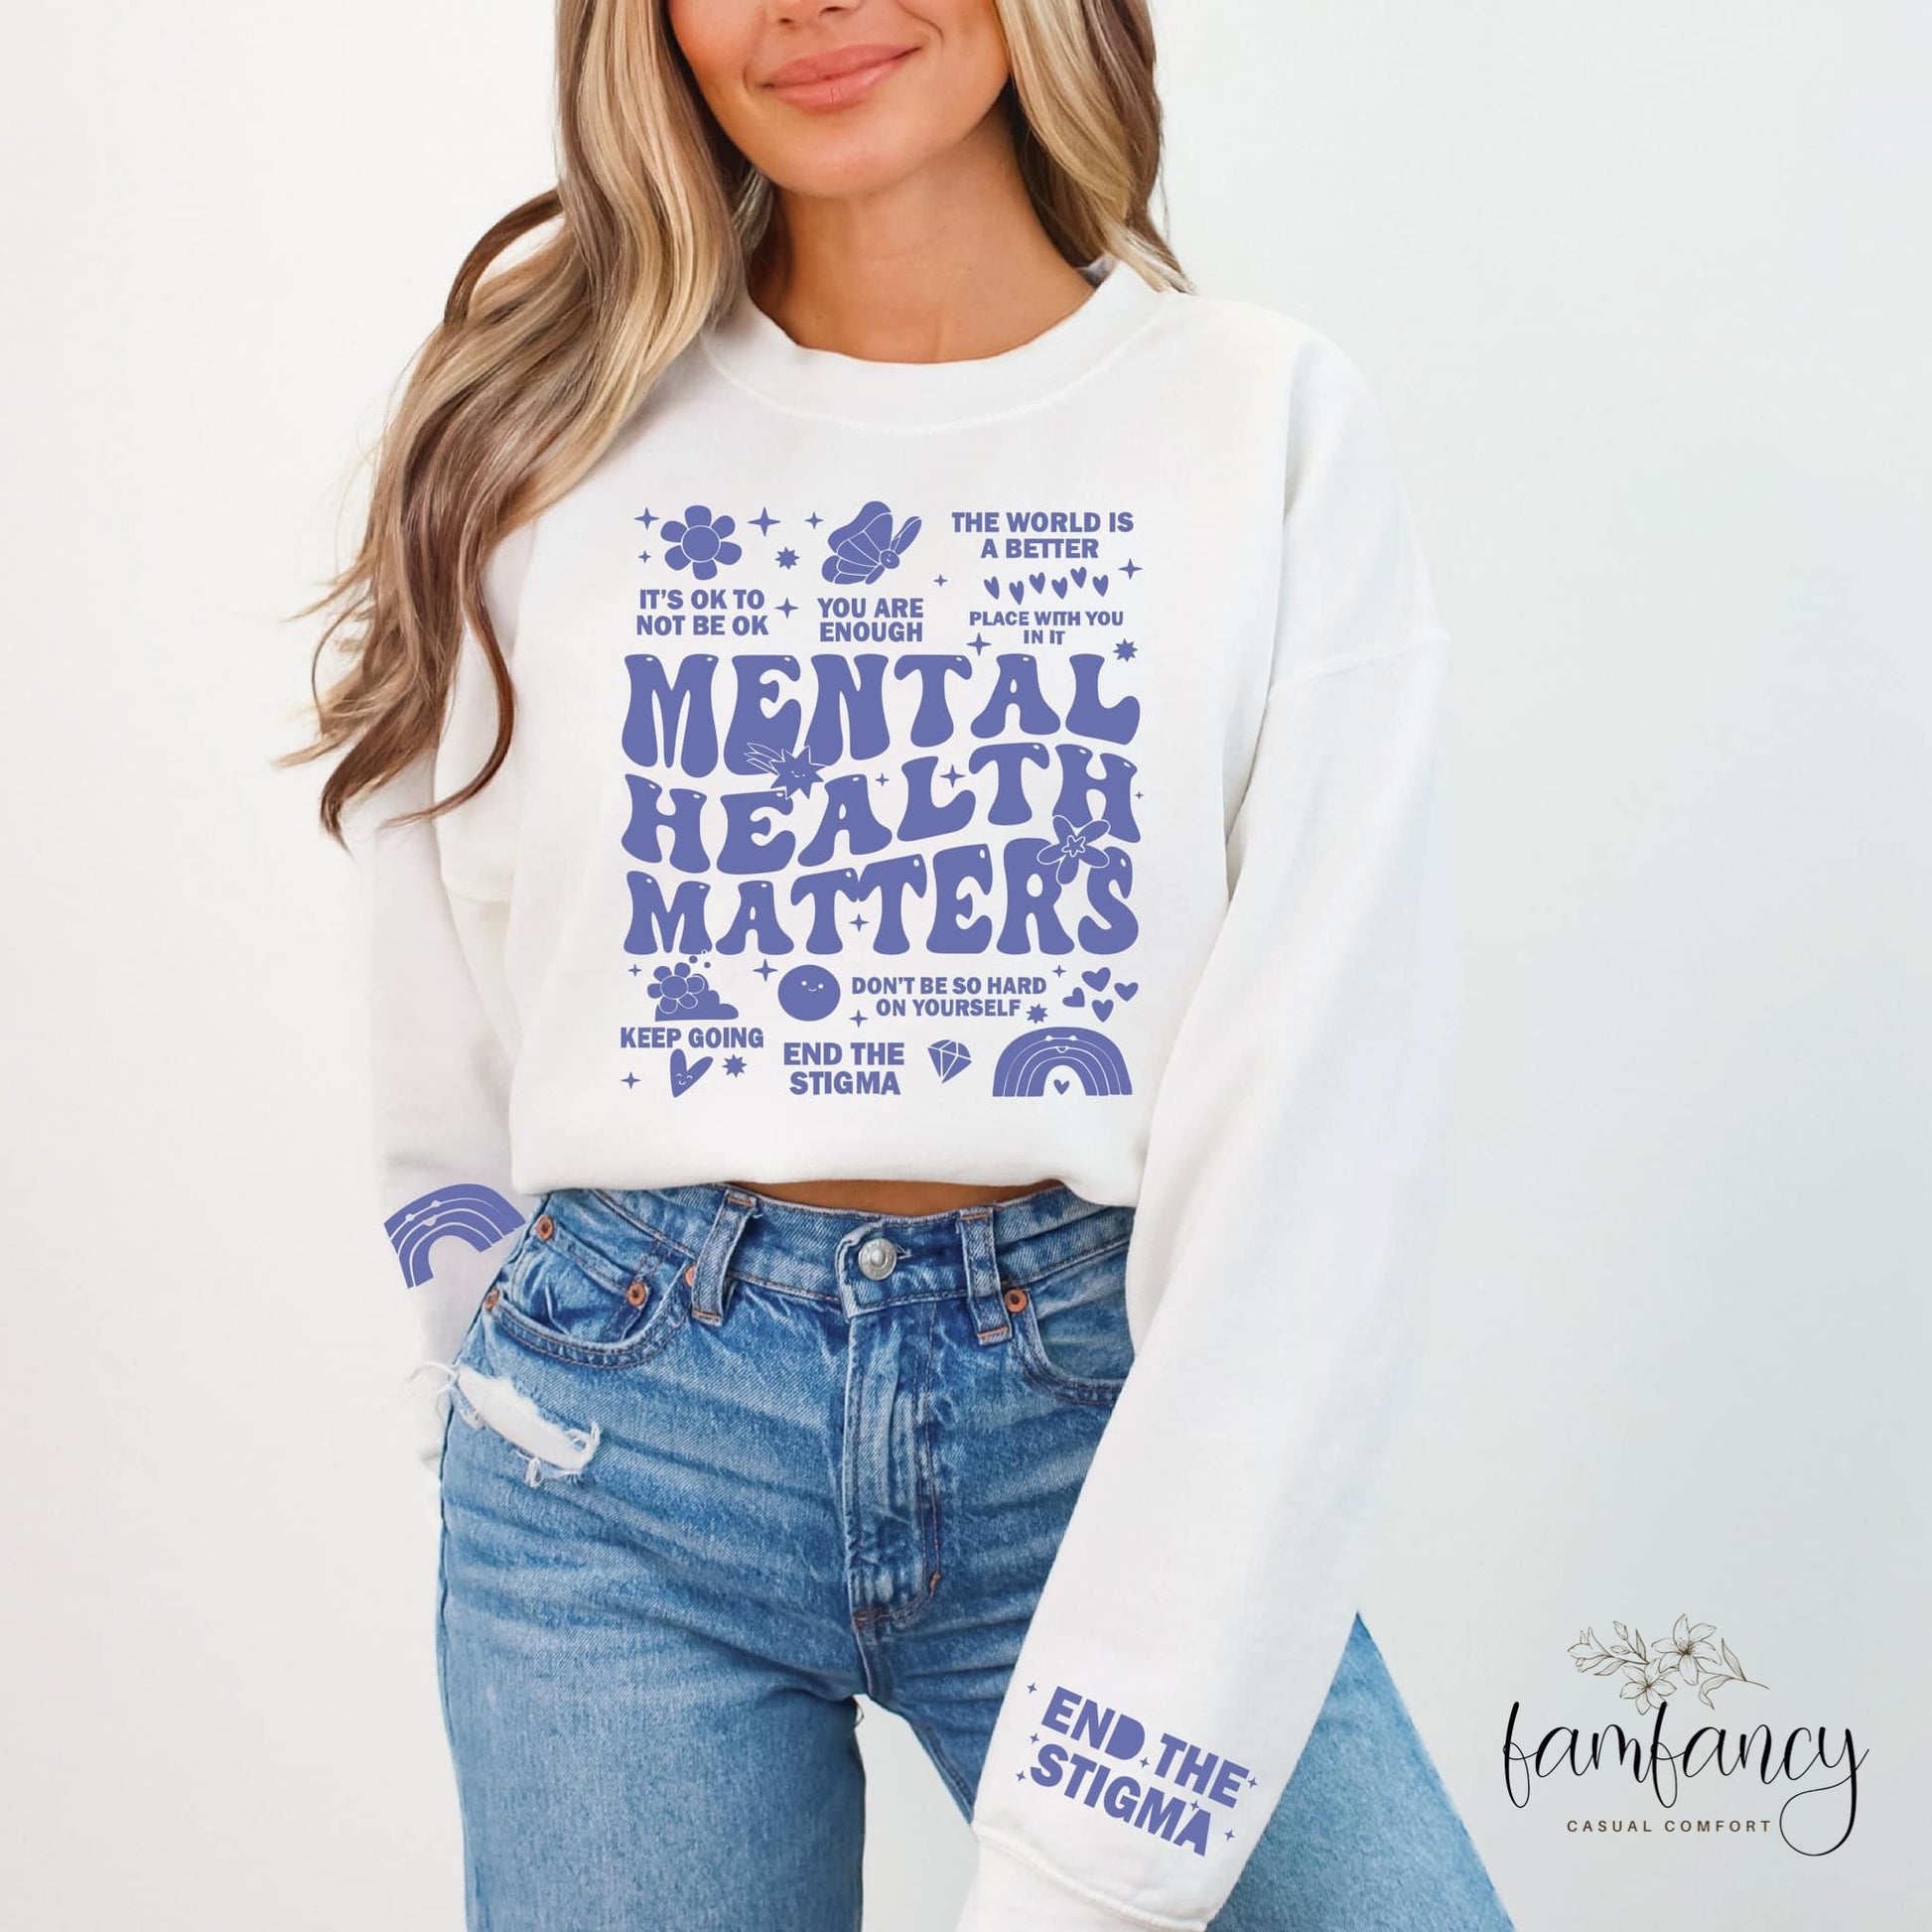 Mental Health Matters Collage With Sleeve Accents - FamFancy Boutique